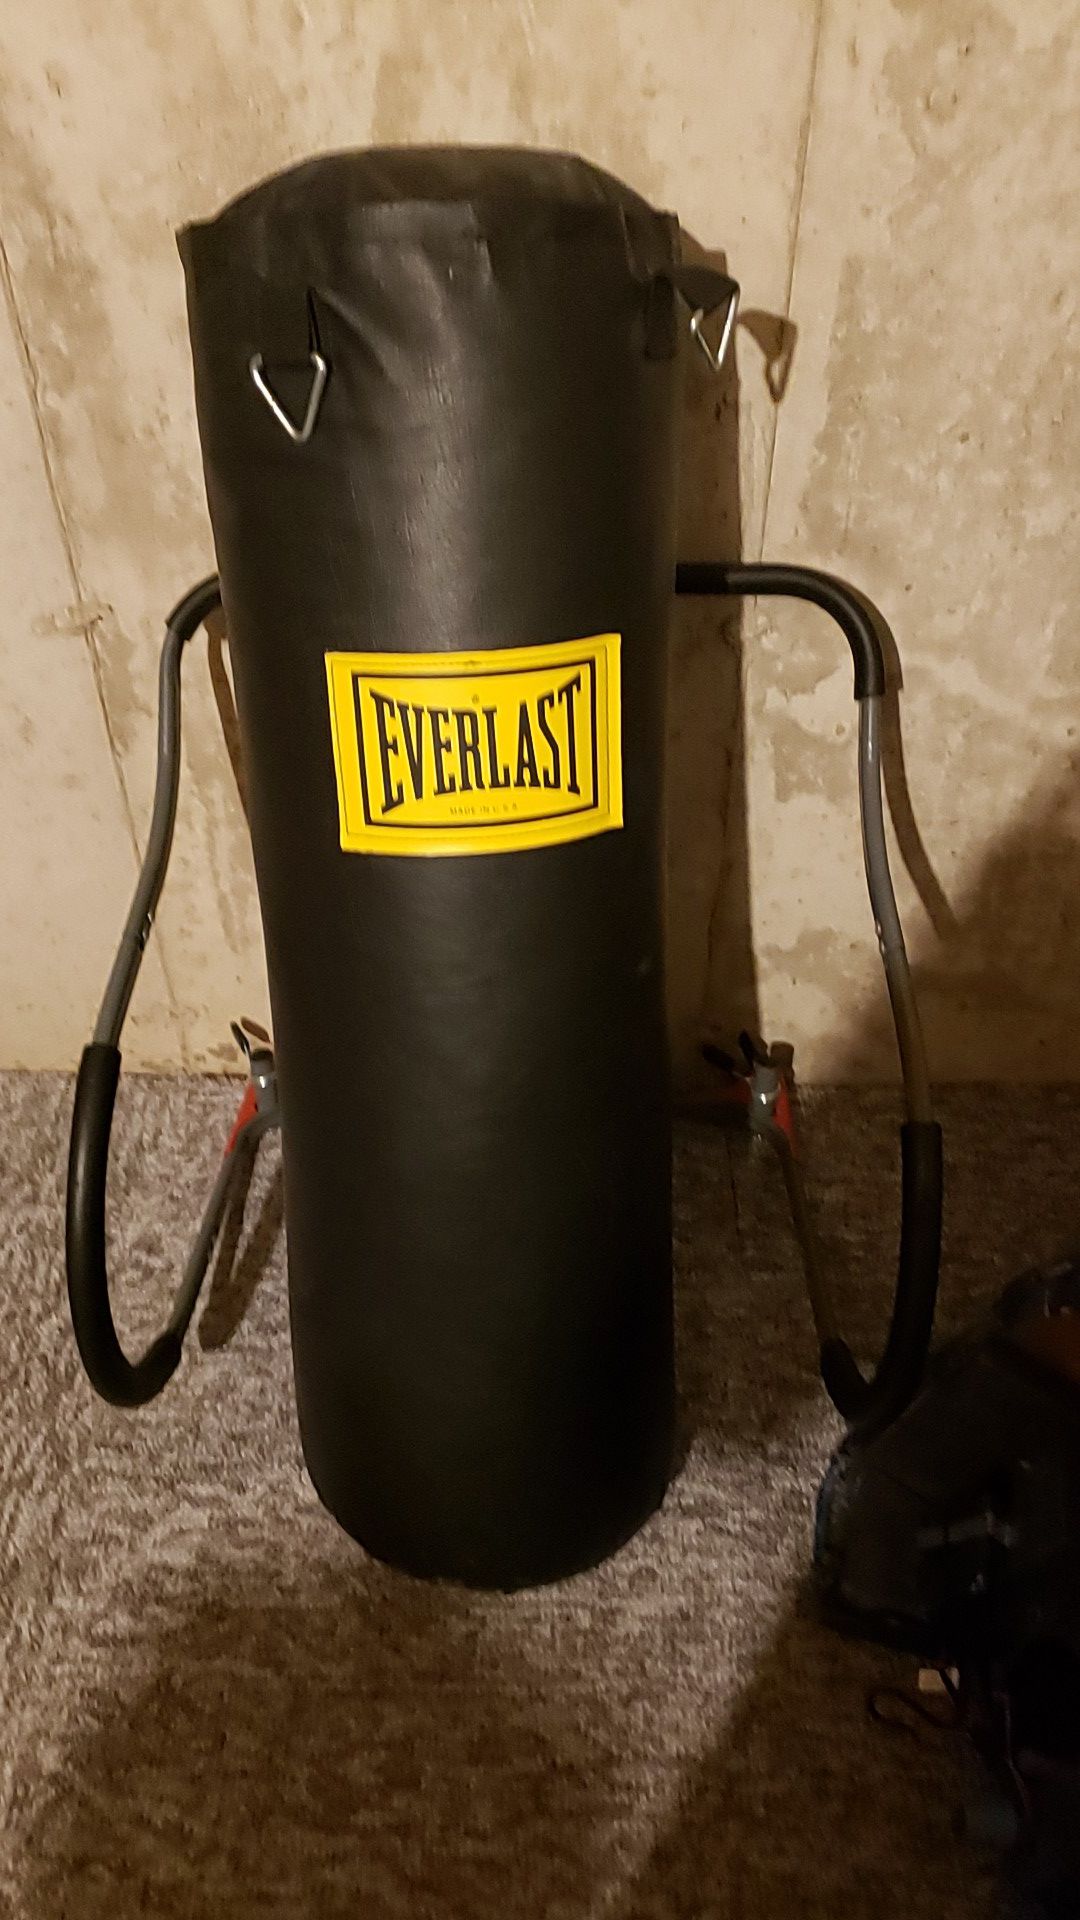 Everlast heavy bag weight 75 to 80 pounds